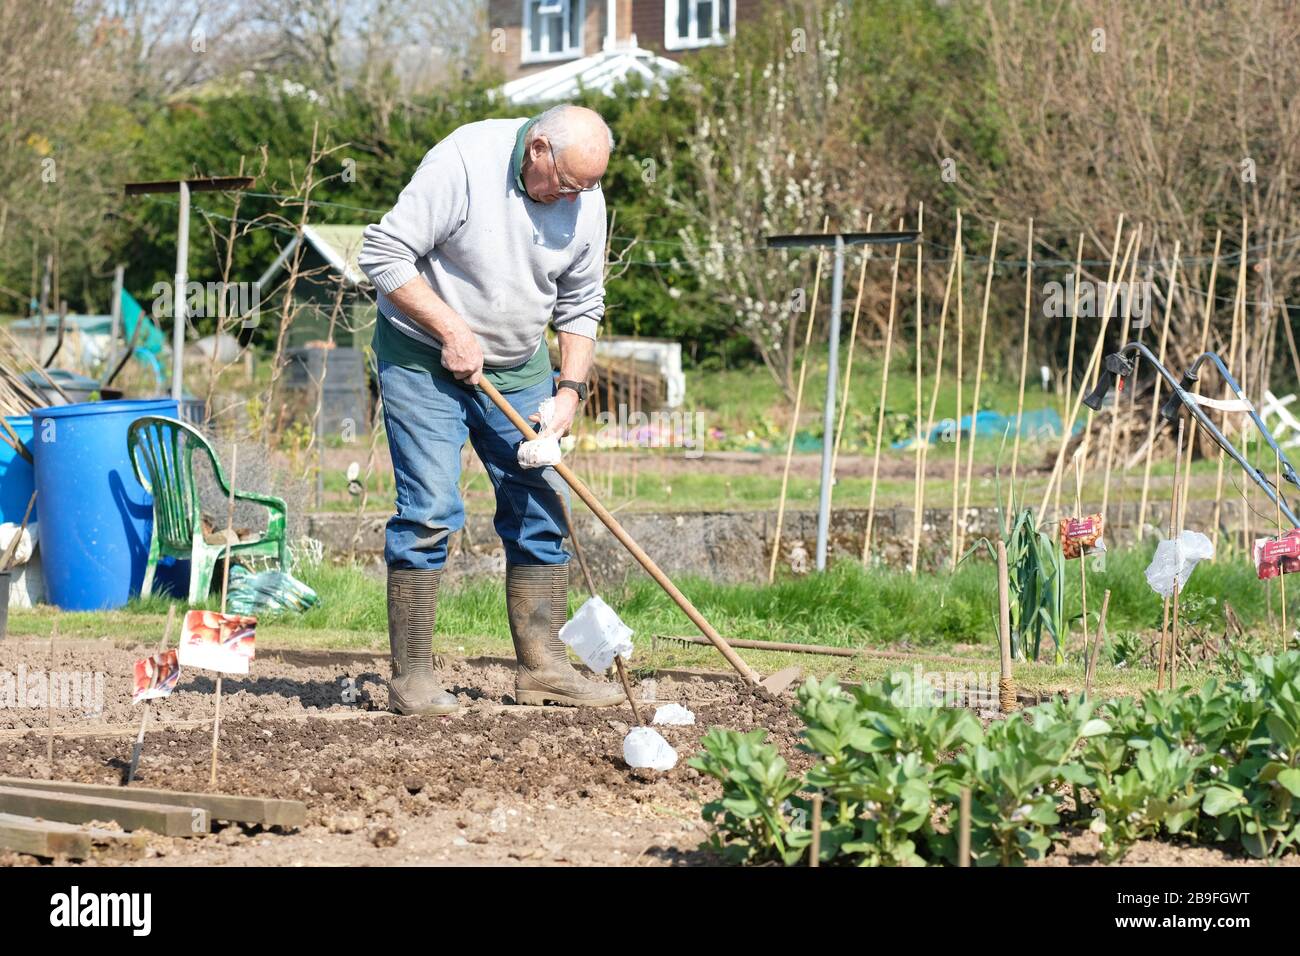 Hereford, Herefordshire, UK - Tuesday 24th March 2020 - An allotment holder tends his vegetable plot on the first day of lockdown Britain taking regard to good social distancing practice during his daily exercise on a fine sunny spring day. Photo Steven May / Alamy Live News Stock Photo